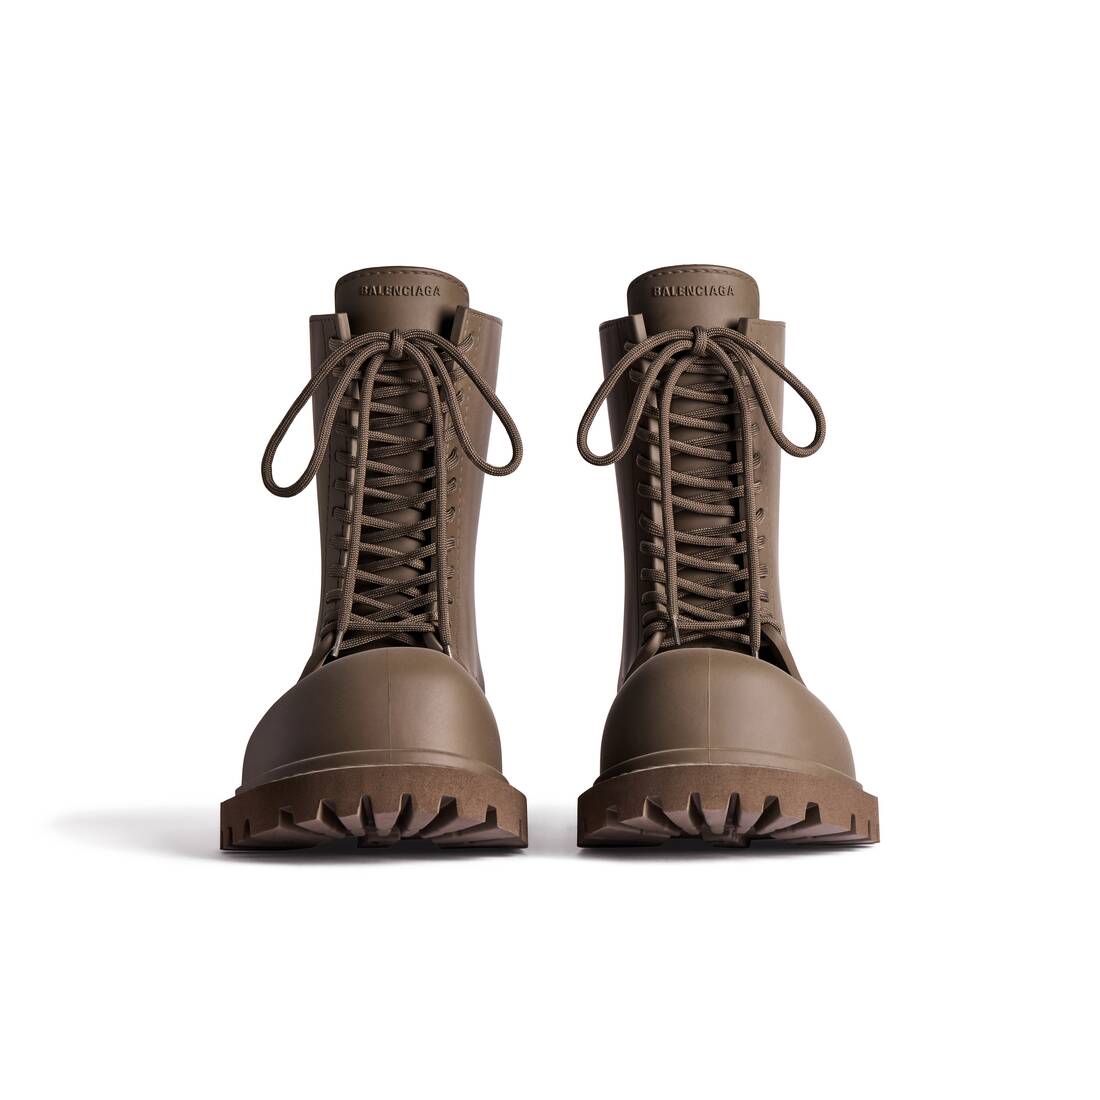 Men's Steroid Boot in Brown